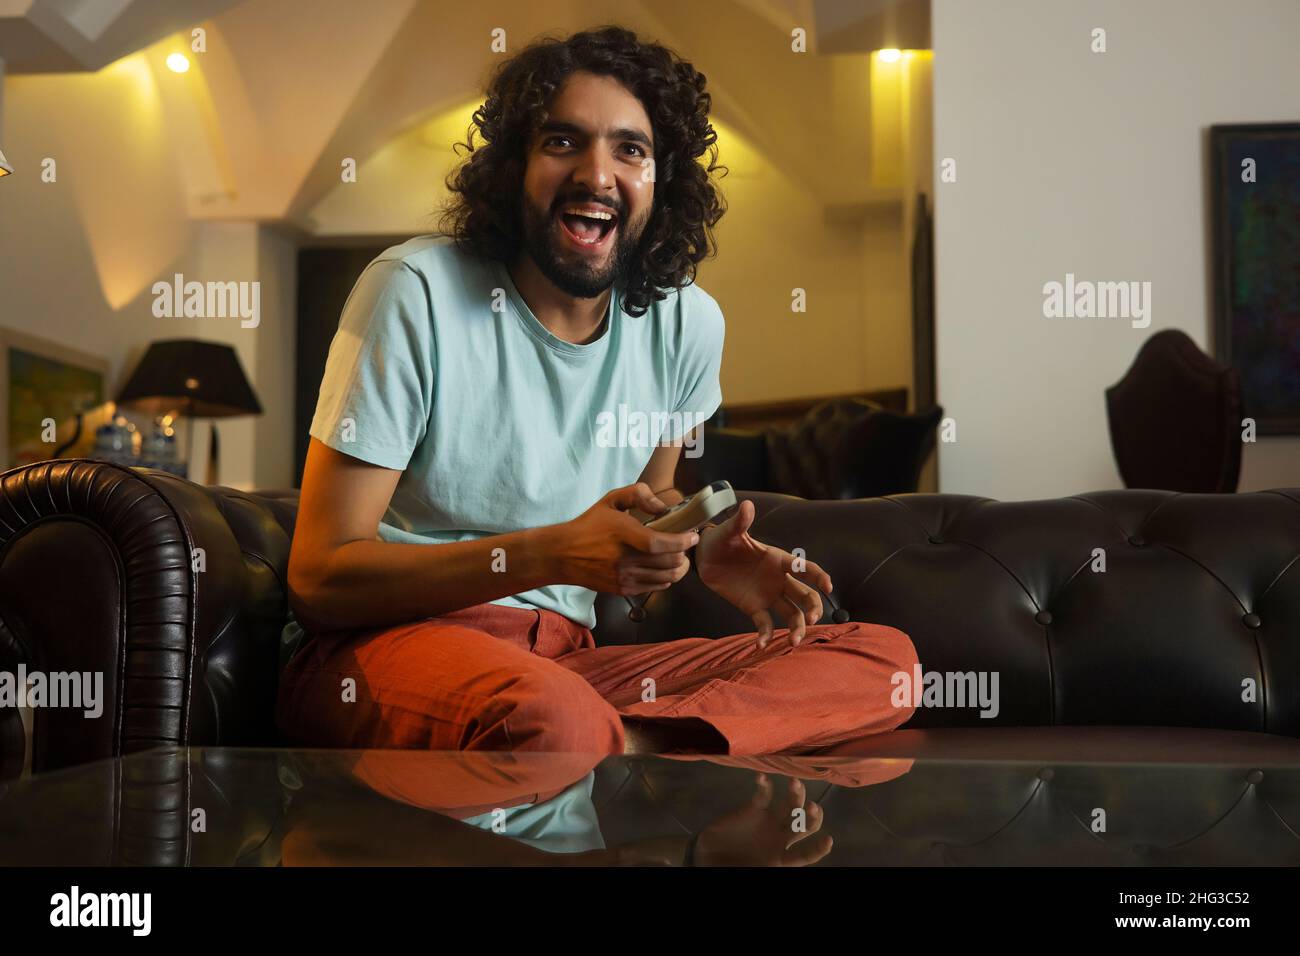 Man with curly hair watching sports on television and cheering Stock Photo